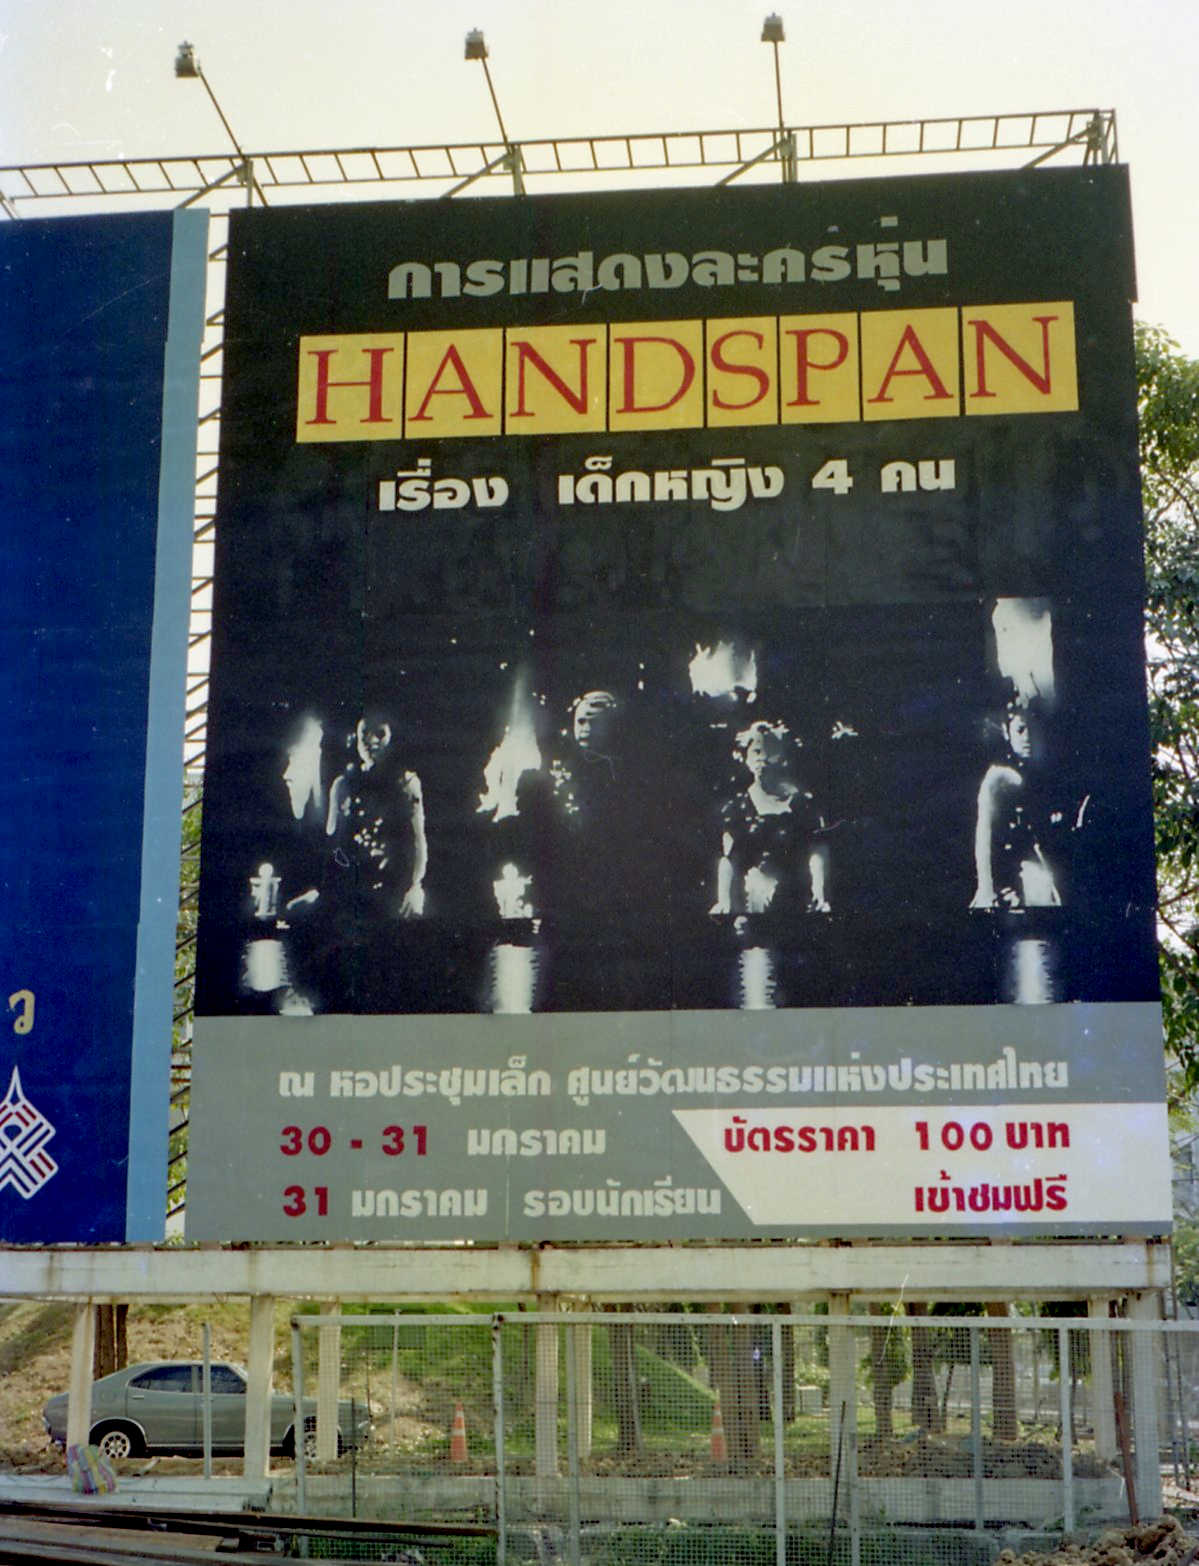 Handspan Theatre Four Little Girls Bangkok billboard with pictures of 4 little girls in performance